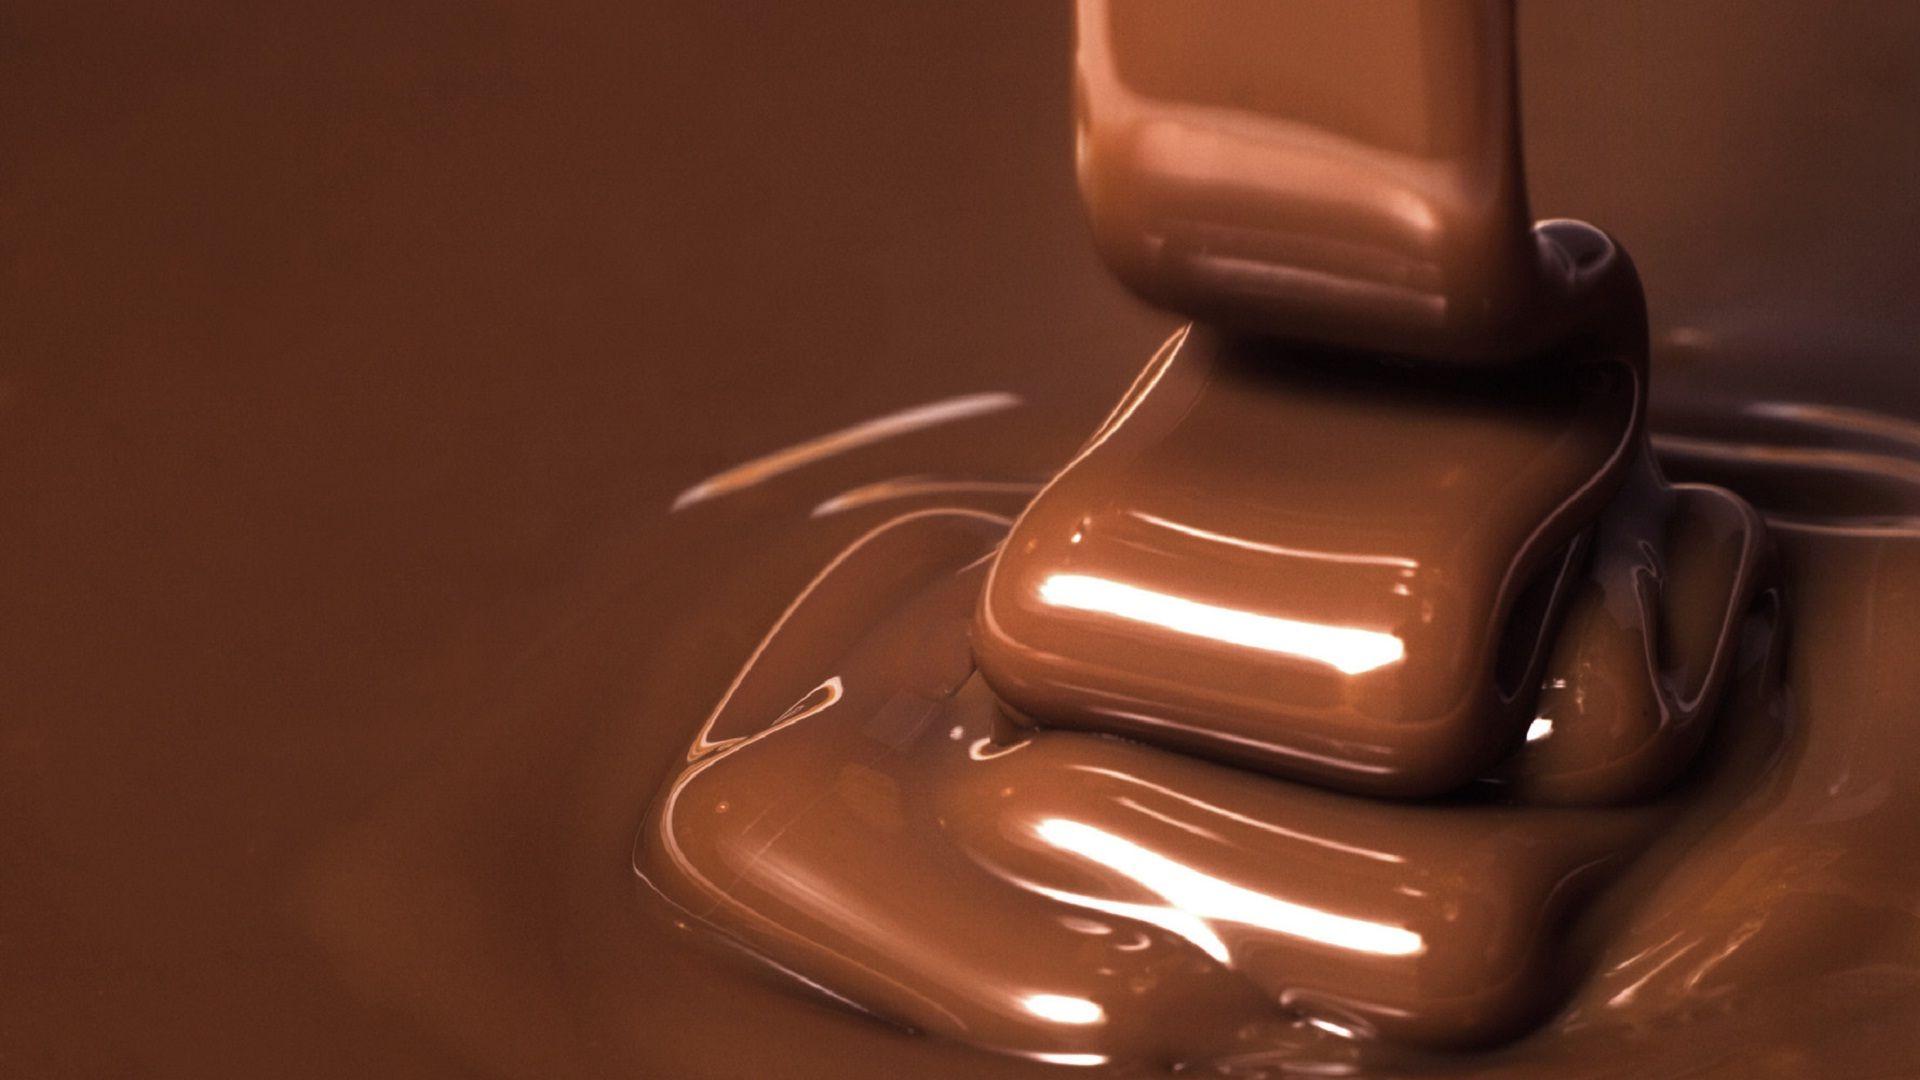 Cream of chocolate awesome wallpaper. HD Wallpaper Rocks